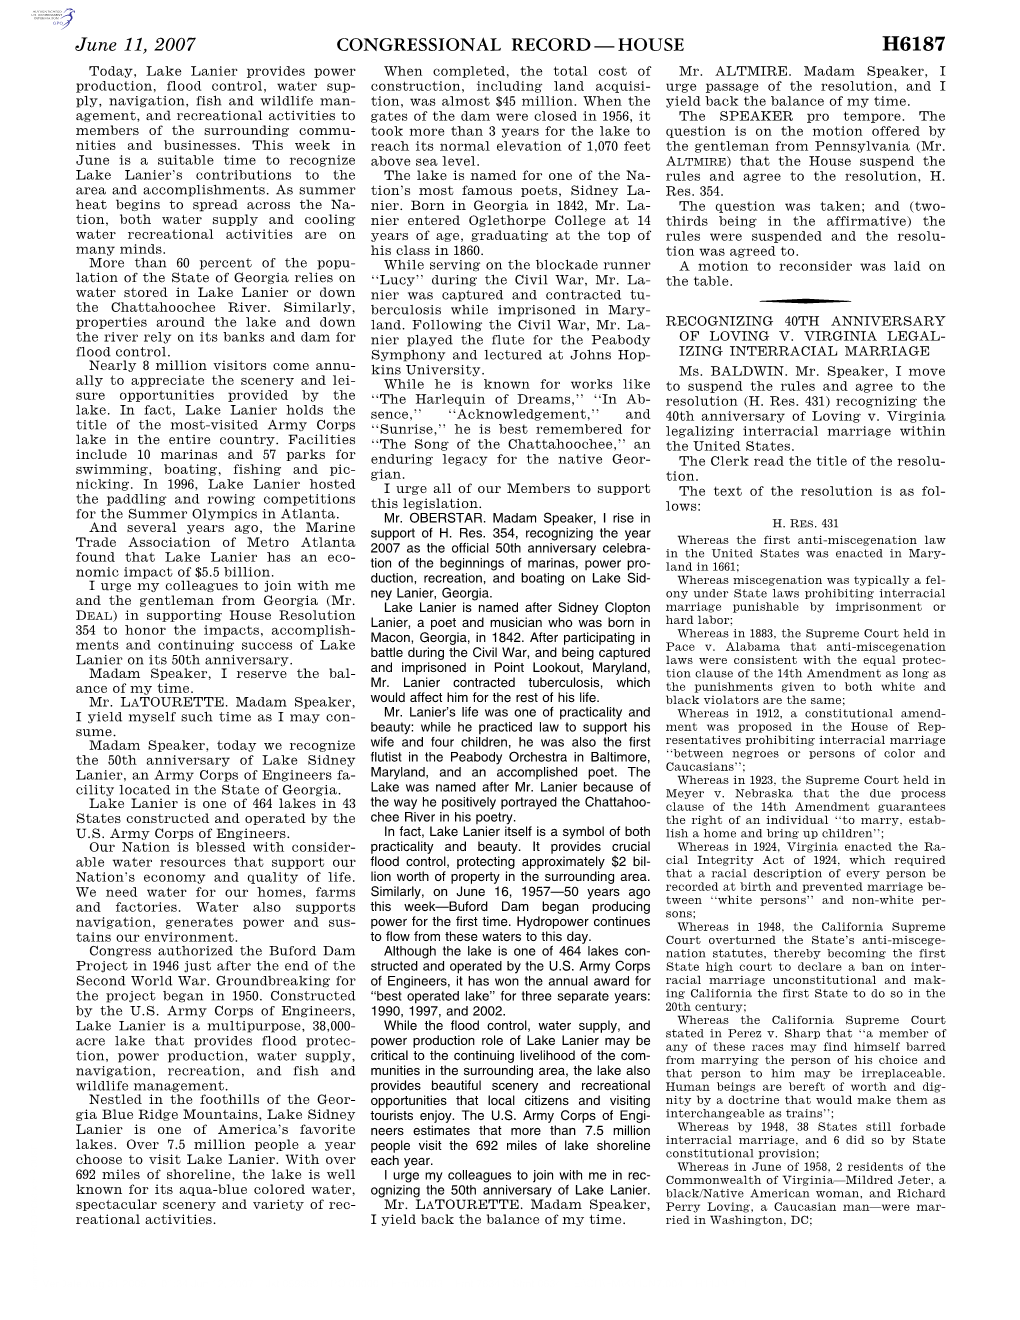 Congressional Record—House H6187